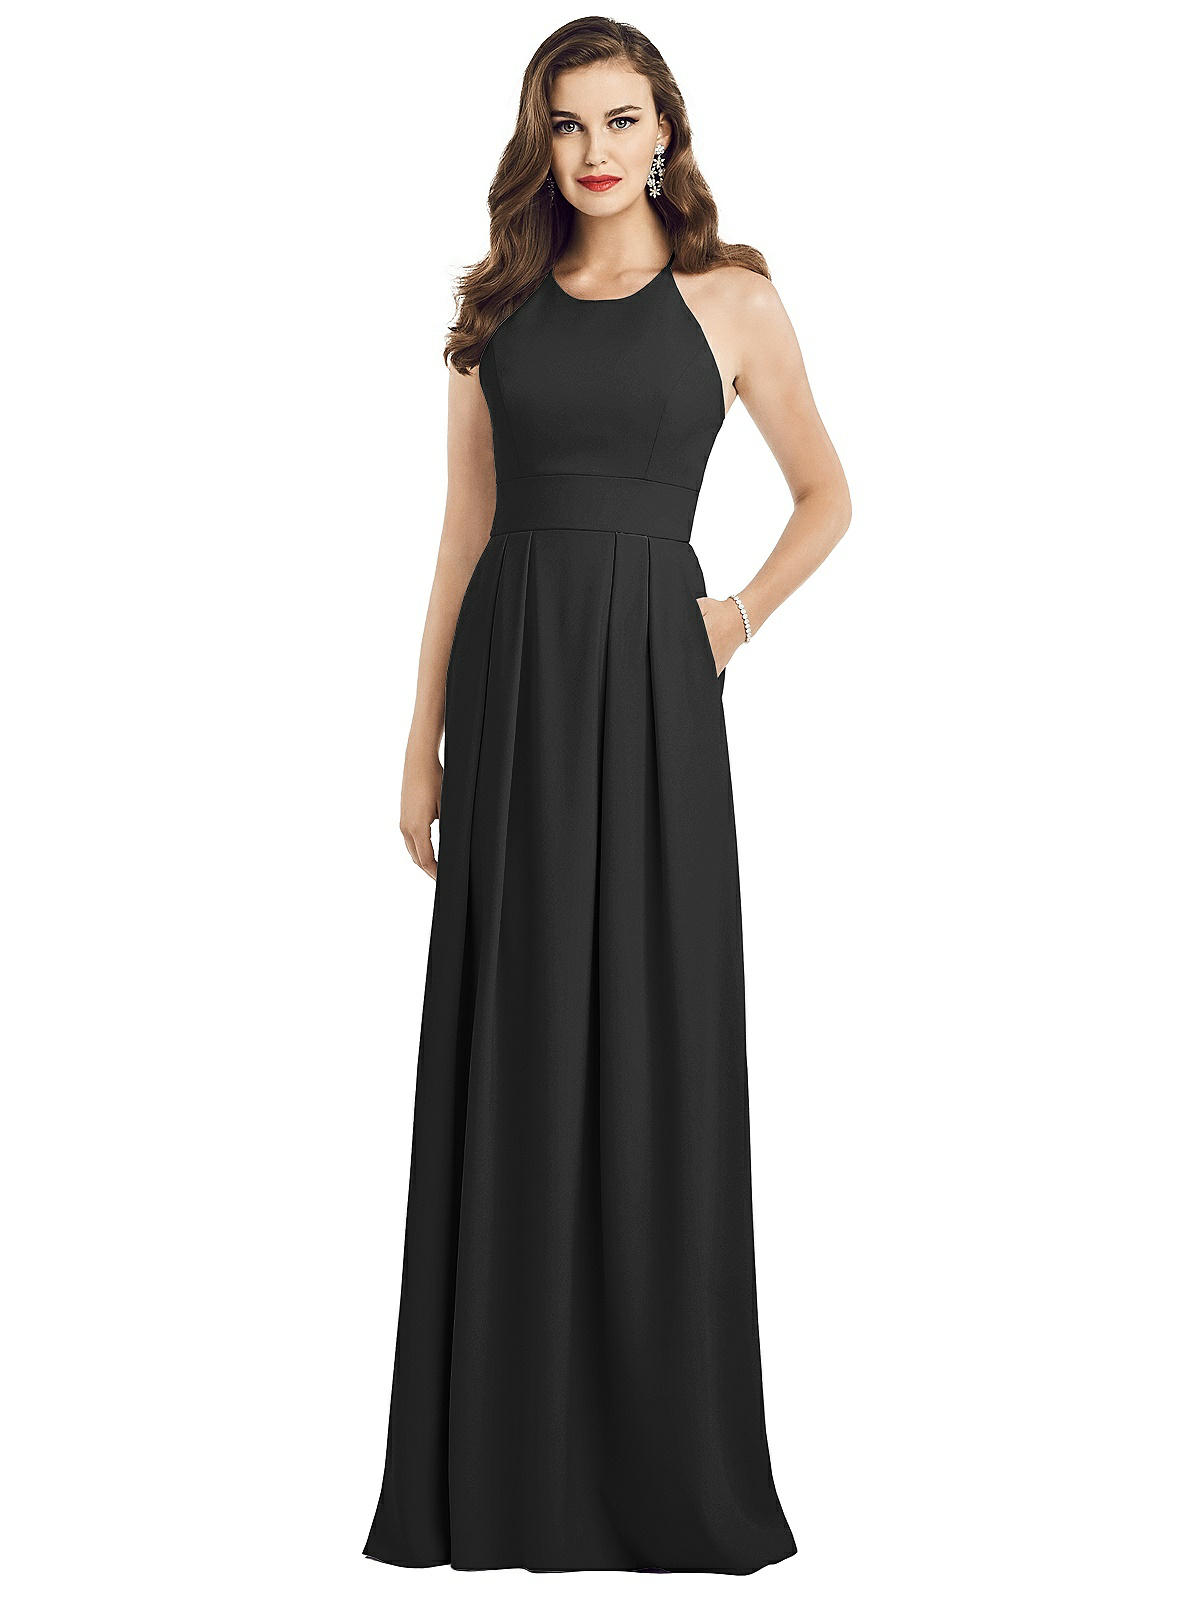 Criss Cross Back Crepe Halter Bridesmaid Dress With Pockets In Black